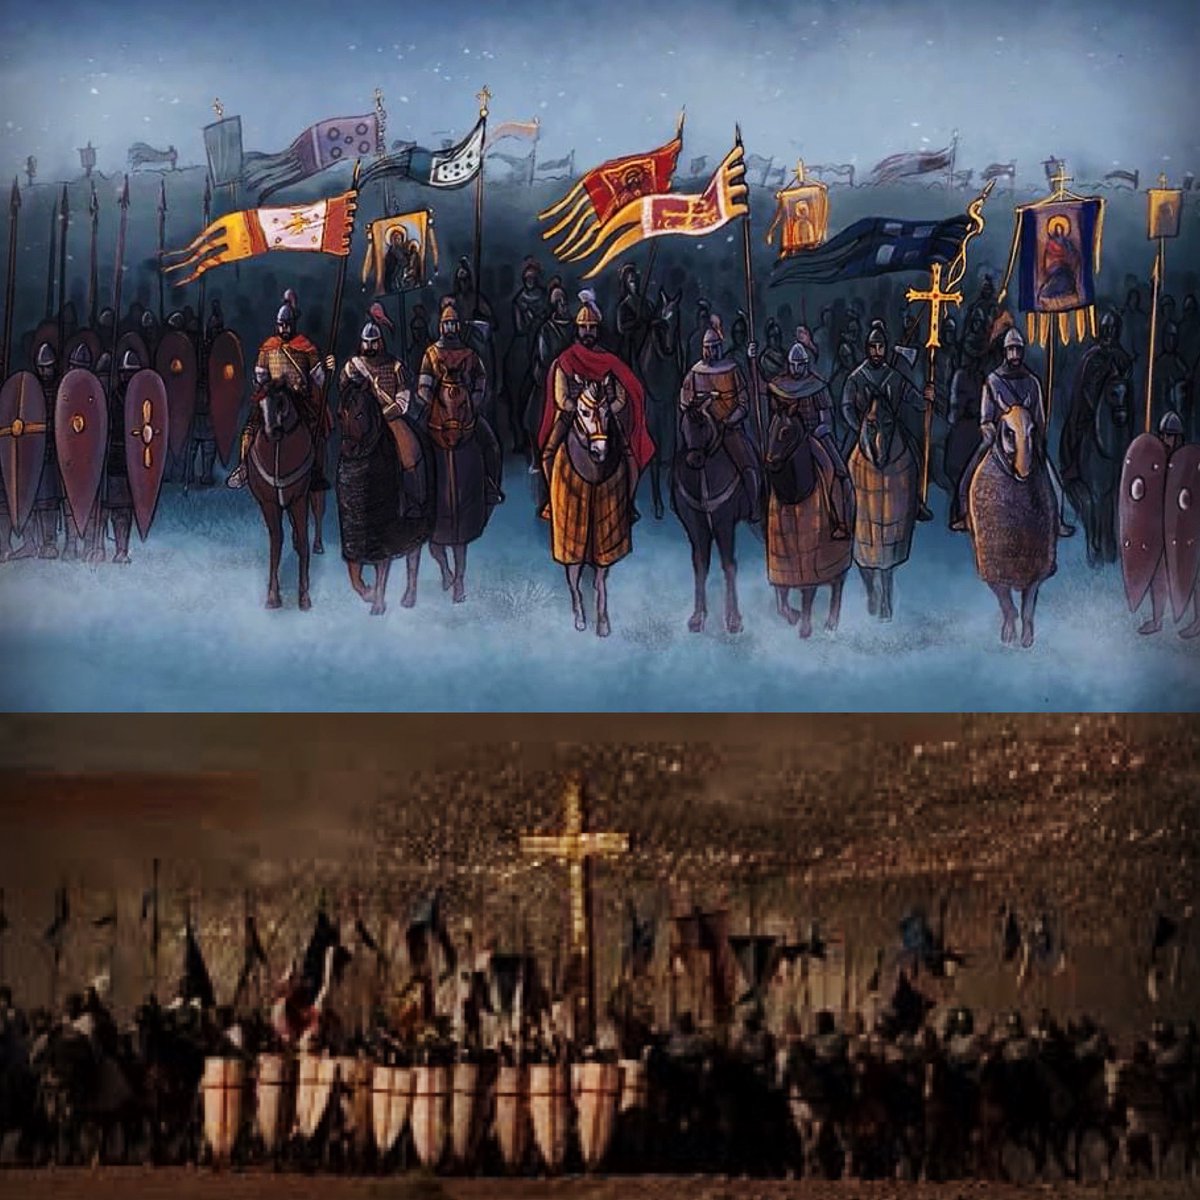 A scene from the “Basil Basileus”series with a lot of Banners and the Imperial Divellion, the emperor’s flag. The scene doesn’t involve emperor Basil II though, but his predecessor Ioannes Tsimiskes. I got inspired by the picture below it. It’s from the movie kingdom of heaven.